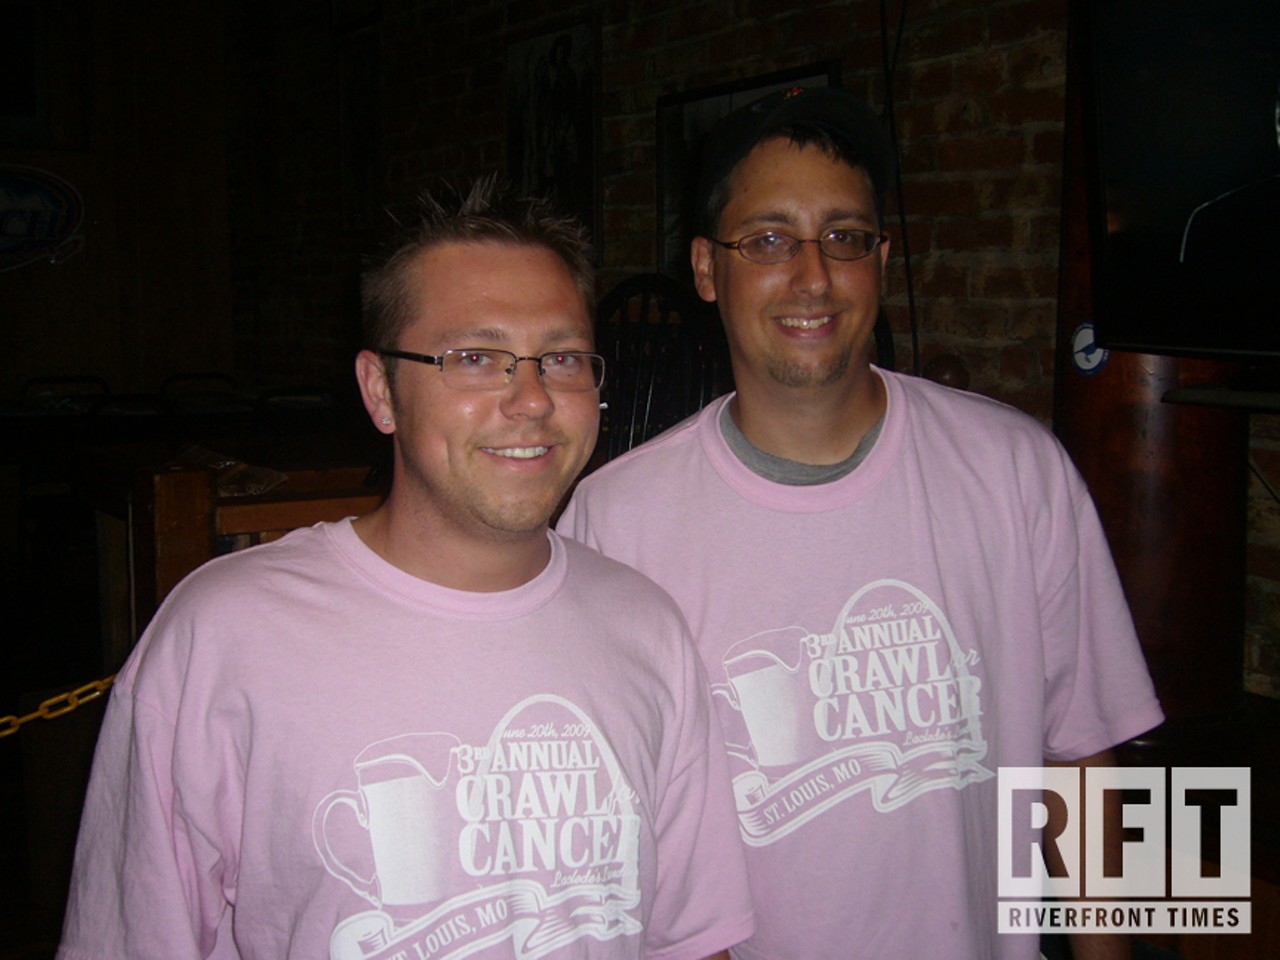 Crawl for Cancer